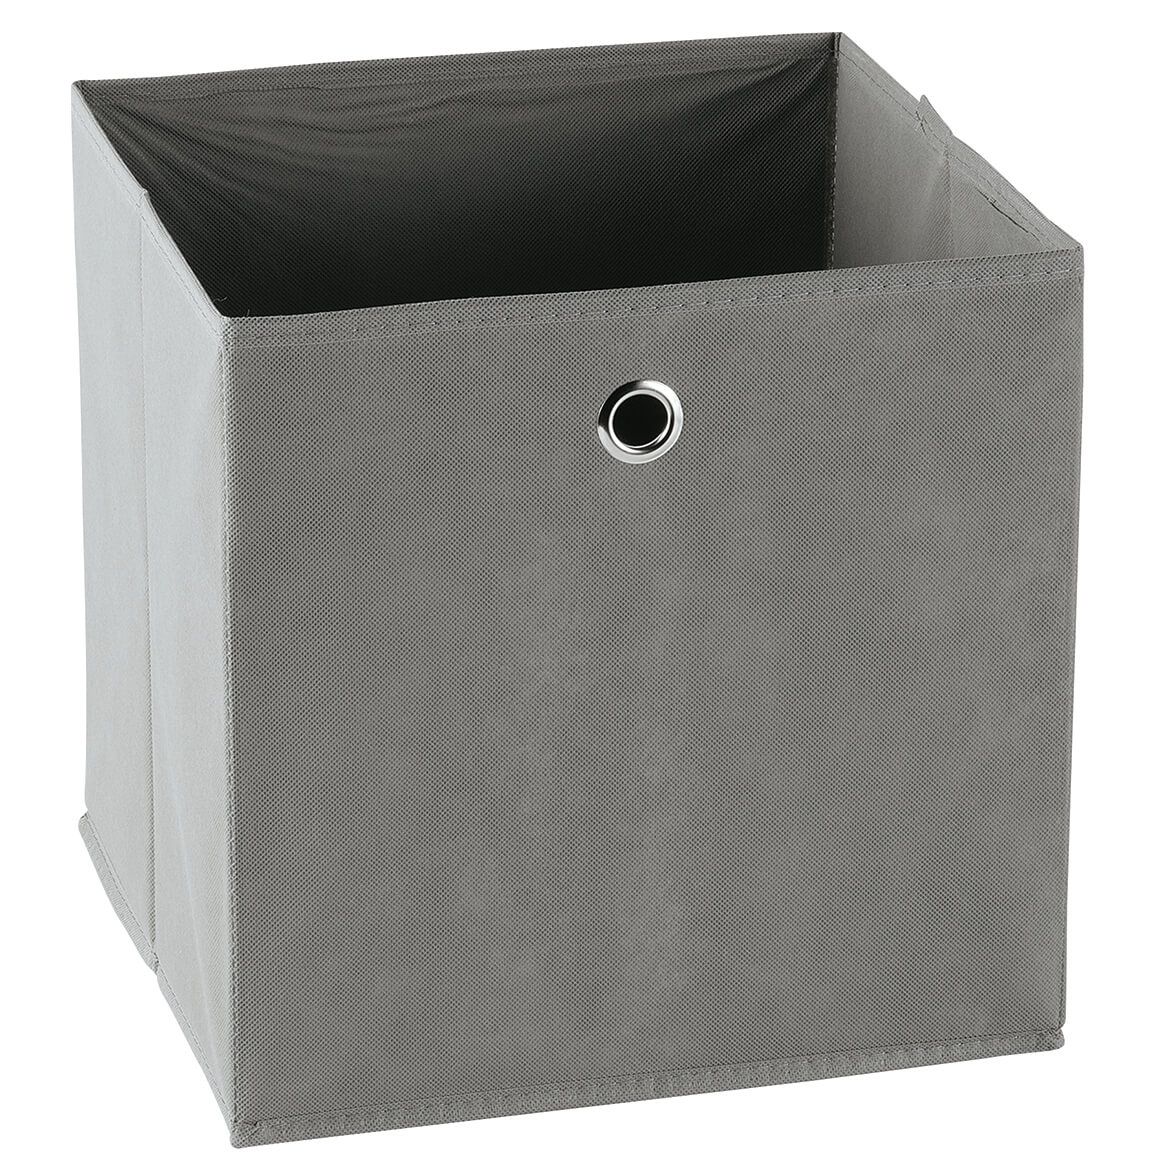 Collapsible Storage Cube by OakRidge™ + '-' + 376862